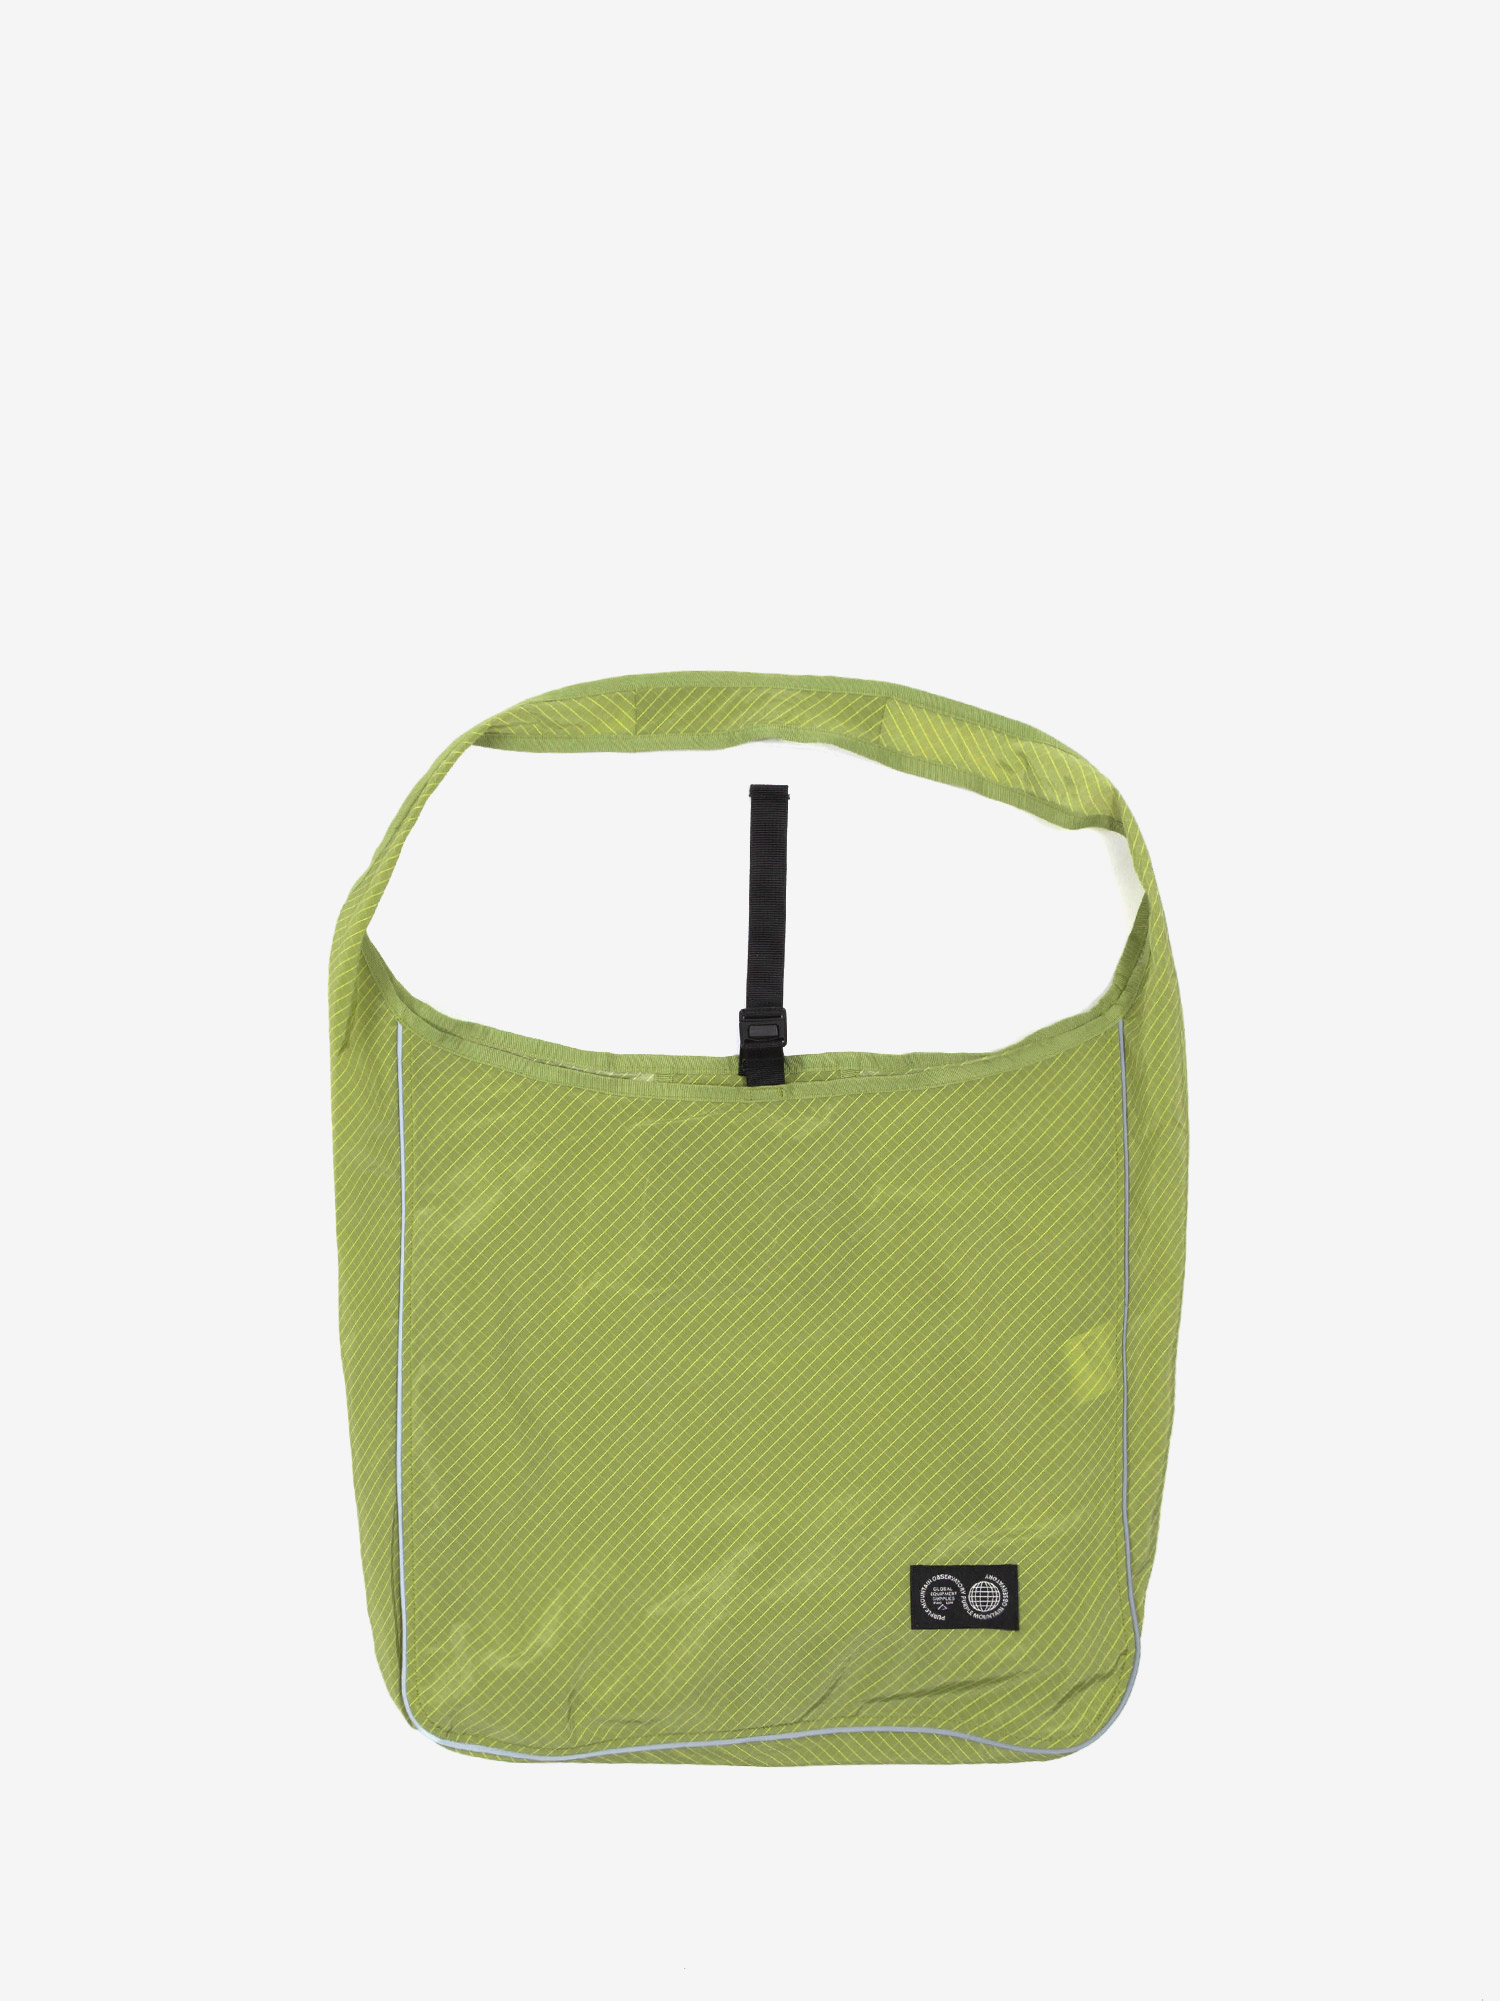 Featured image for “RIPSTOP CAMPING TOTE LIME”